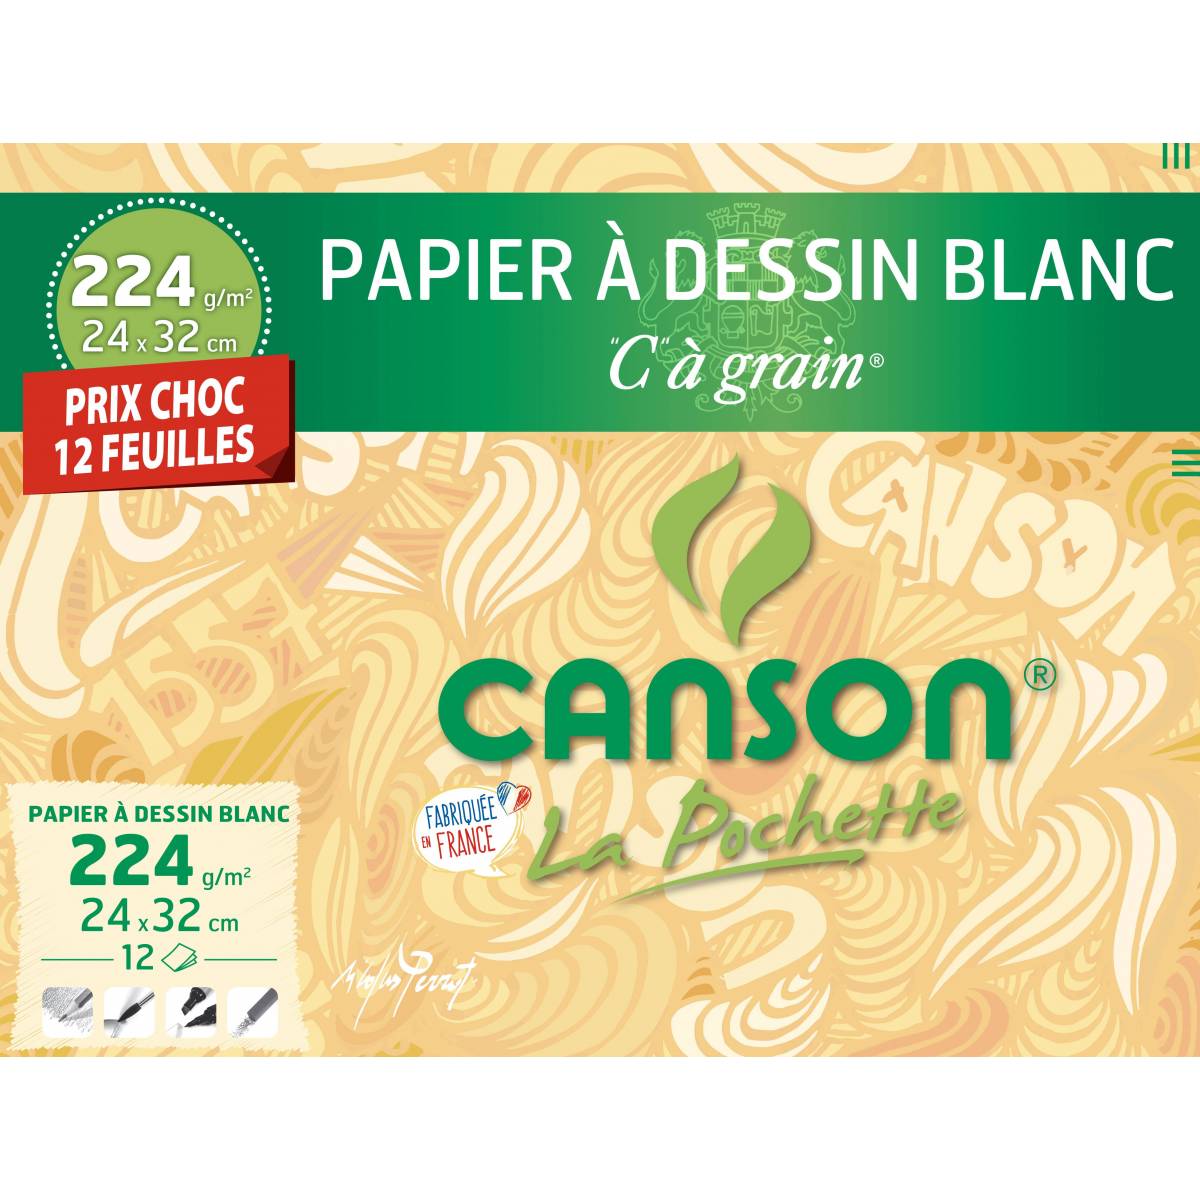 12 White drawing papers CANSON C grain 24 X 32 CM